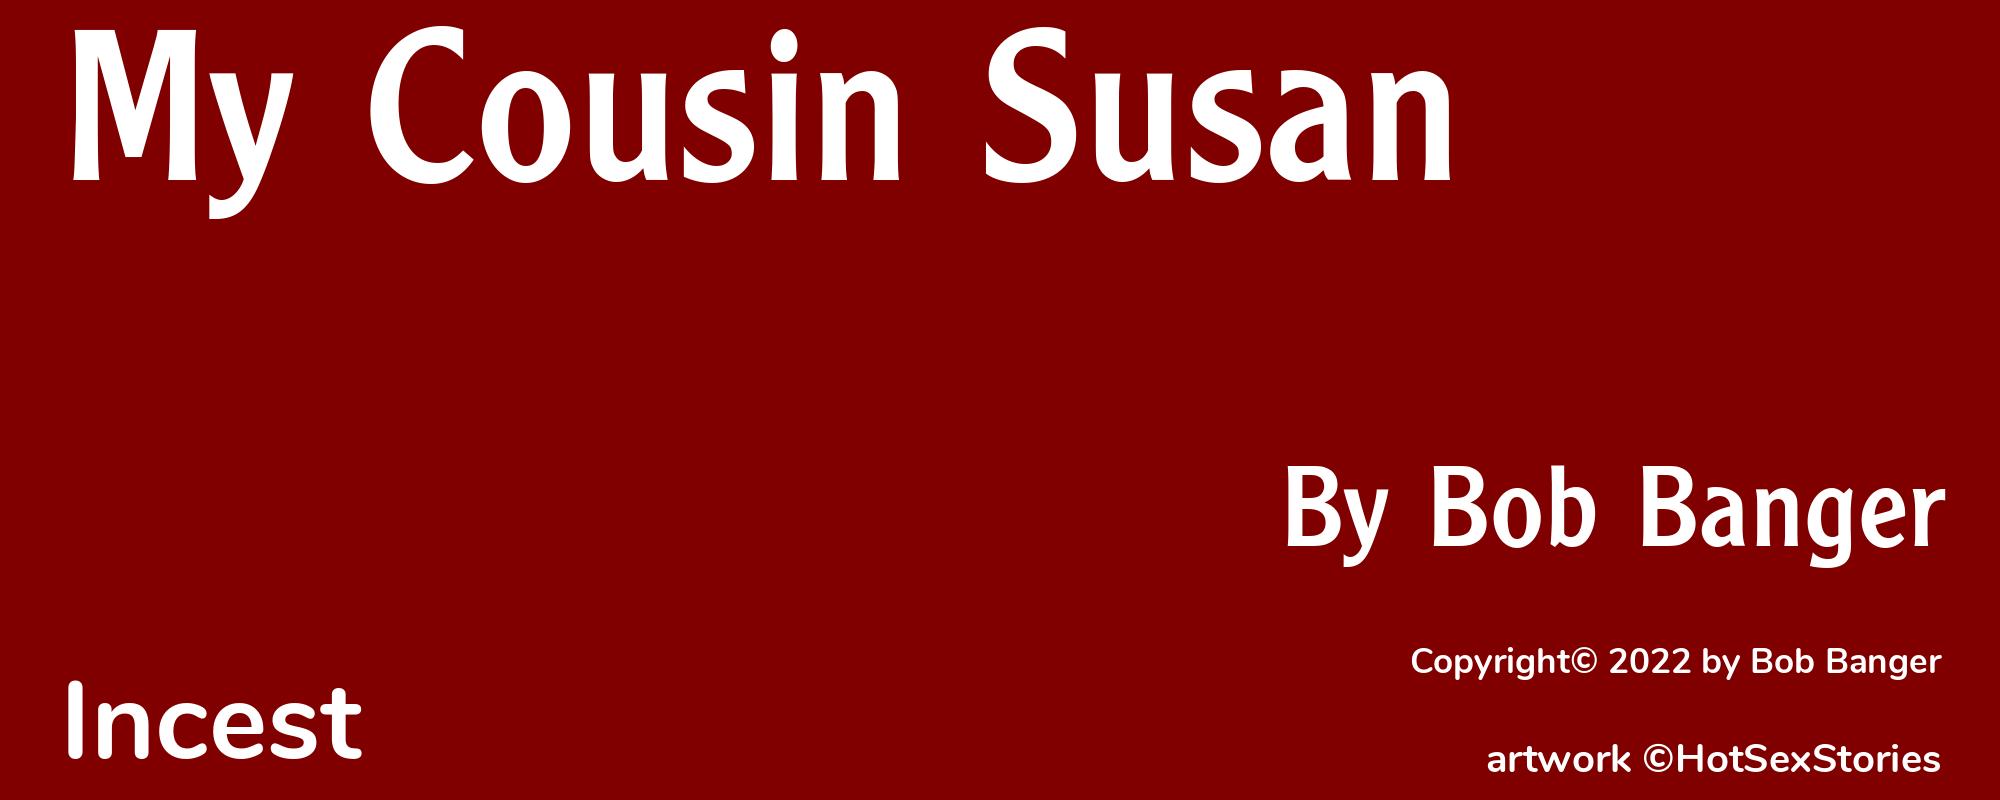 My Cousin Susan - Cover